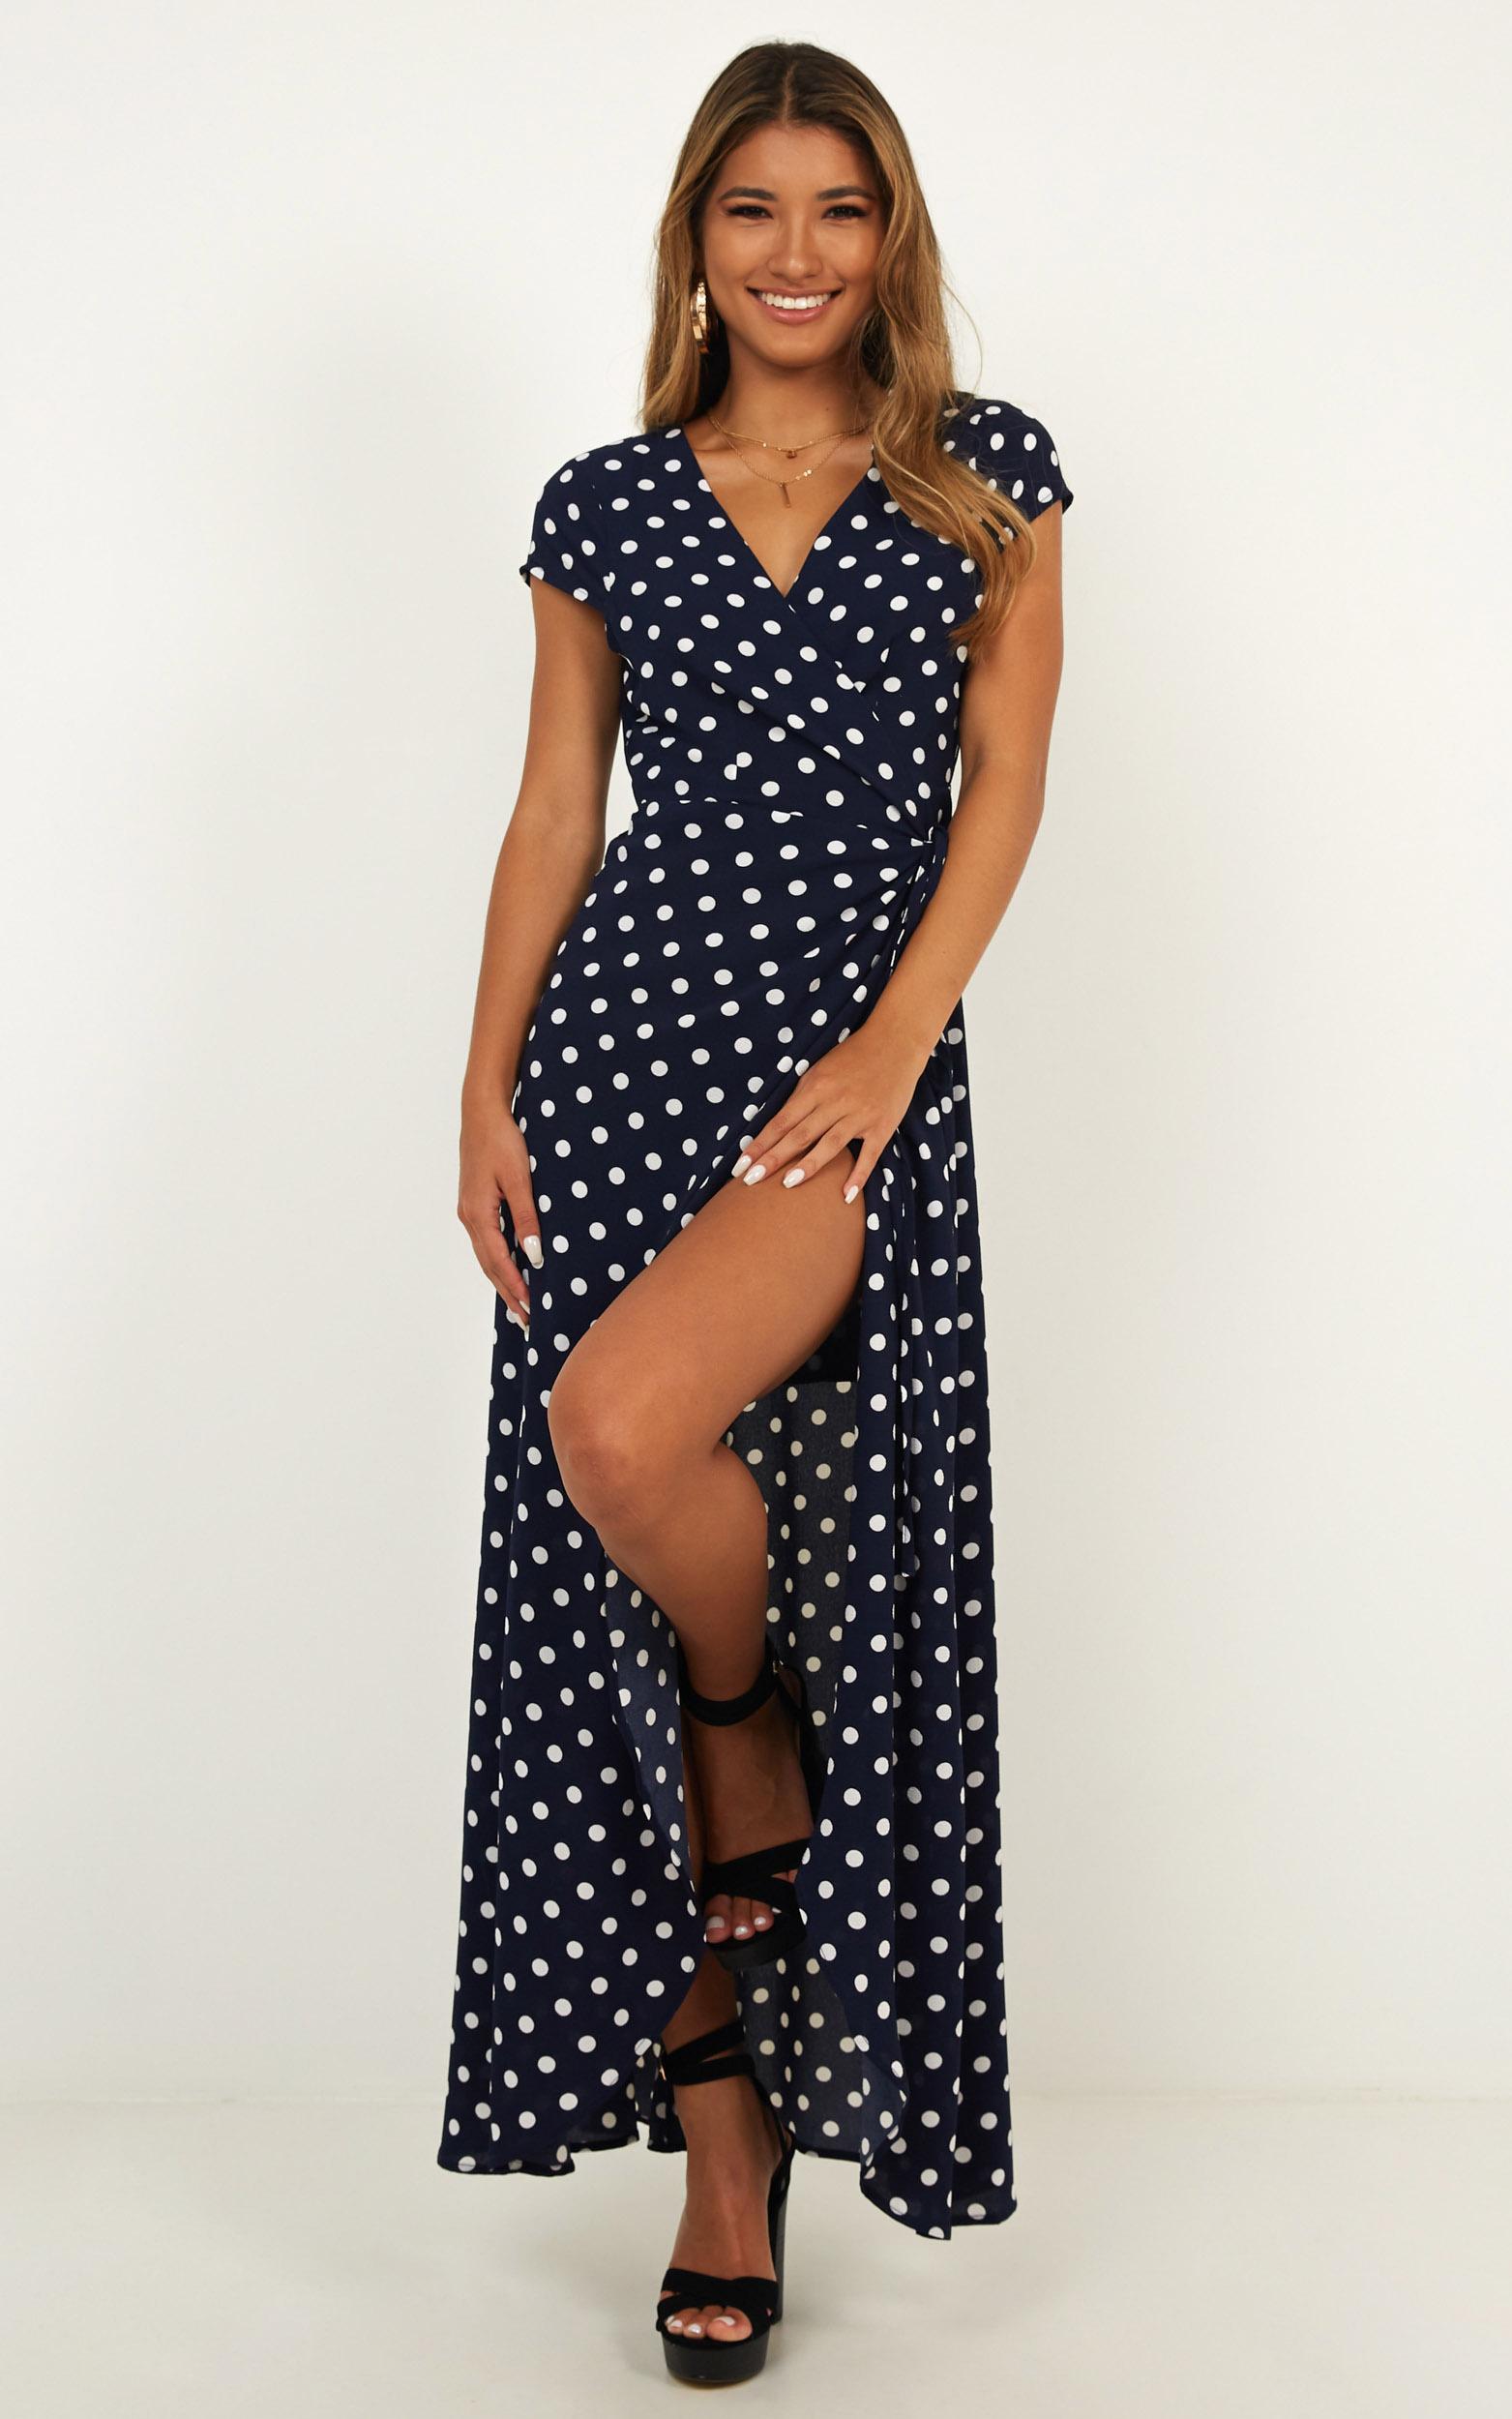 Wrap and Cross maxi dress in navy spot - 20 (XXXXL), Navy, hi-res image number null